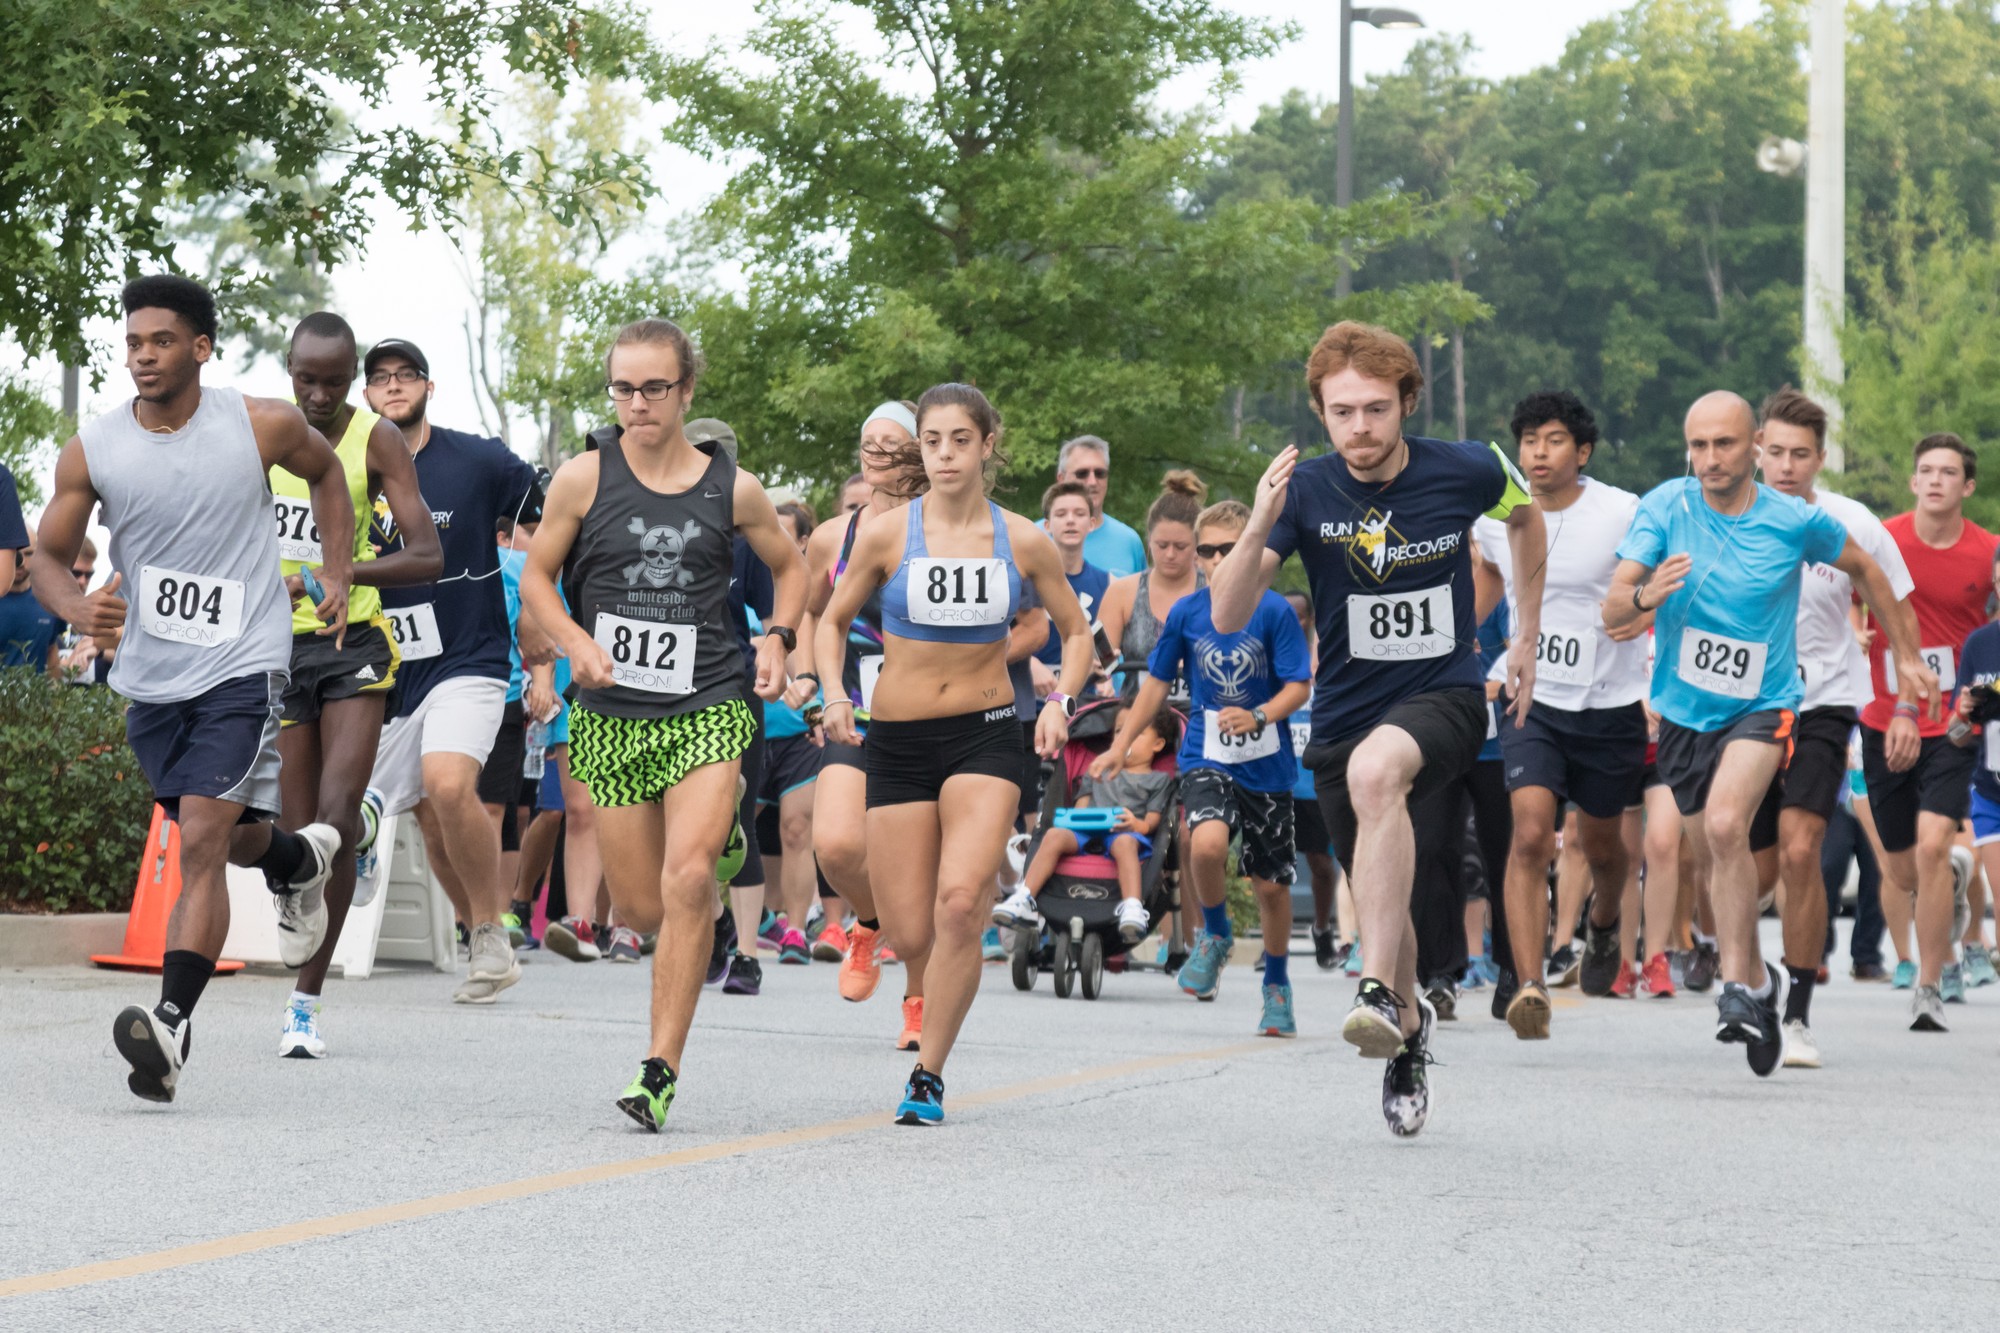 5K supports treatment for addiction, eating disorders